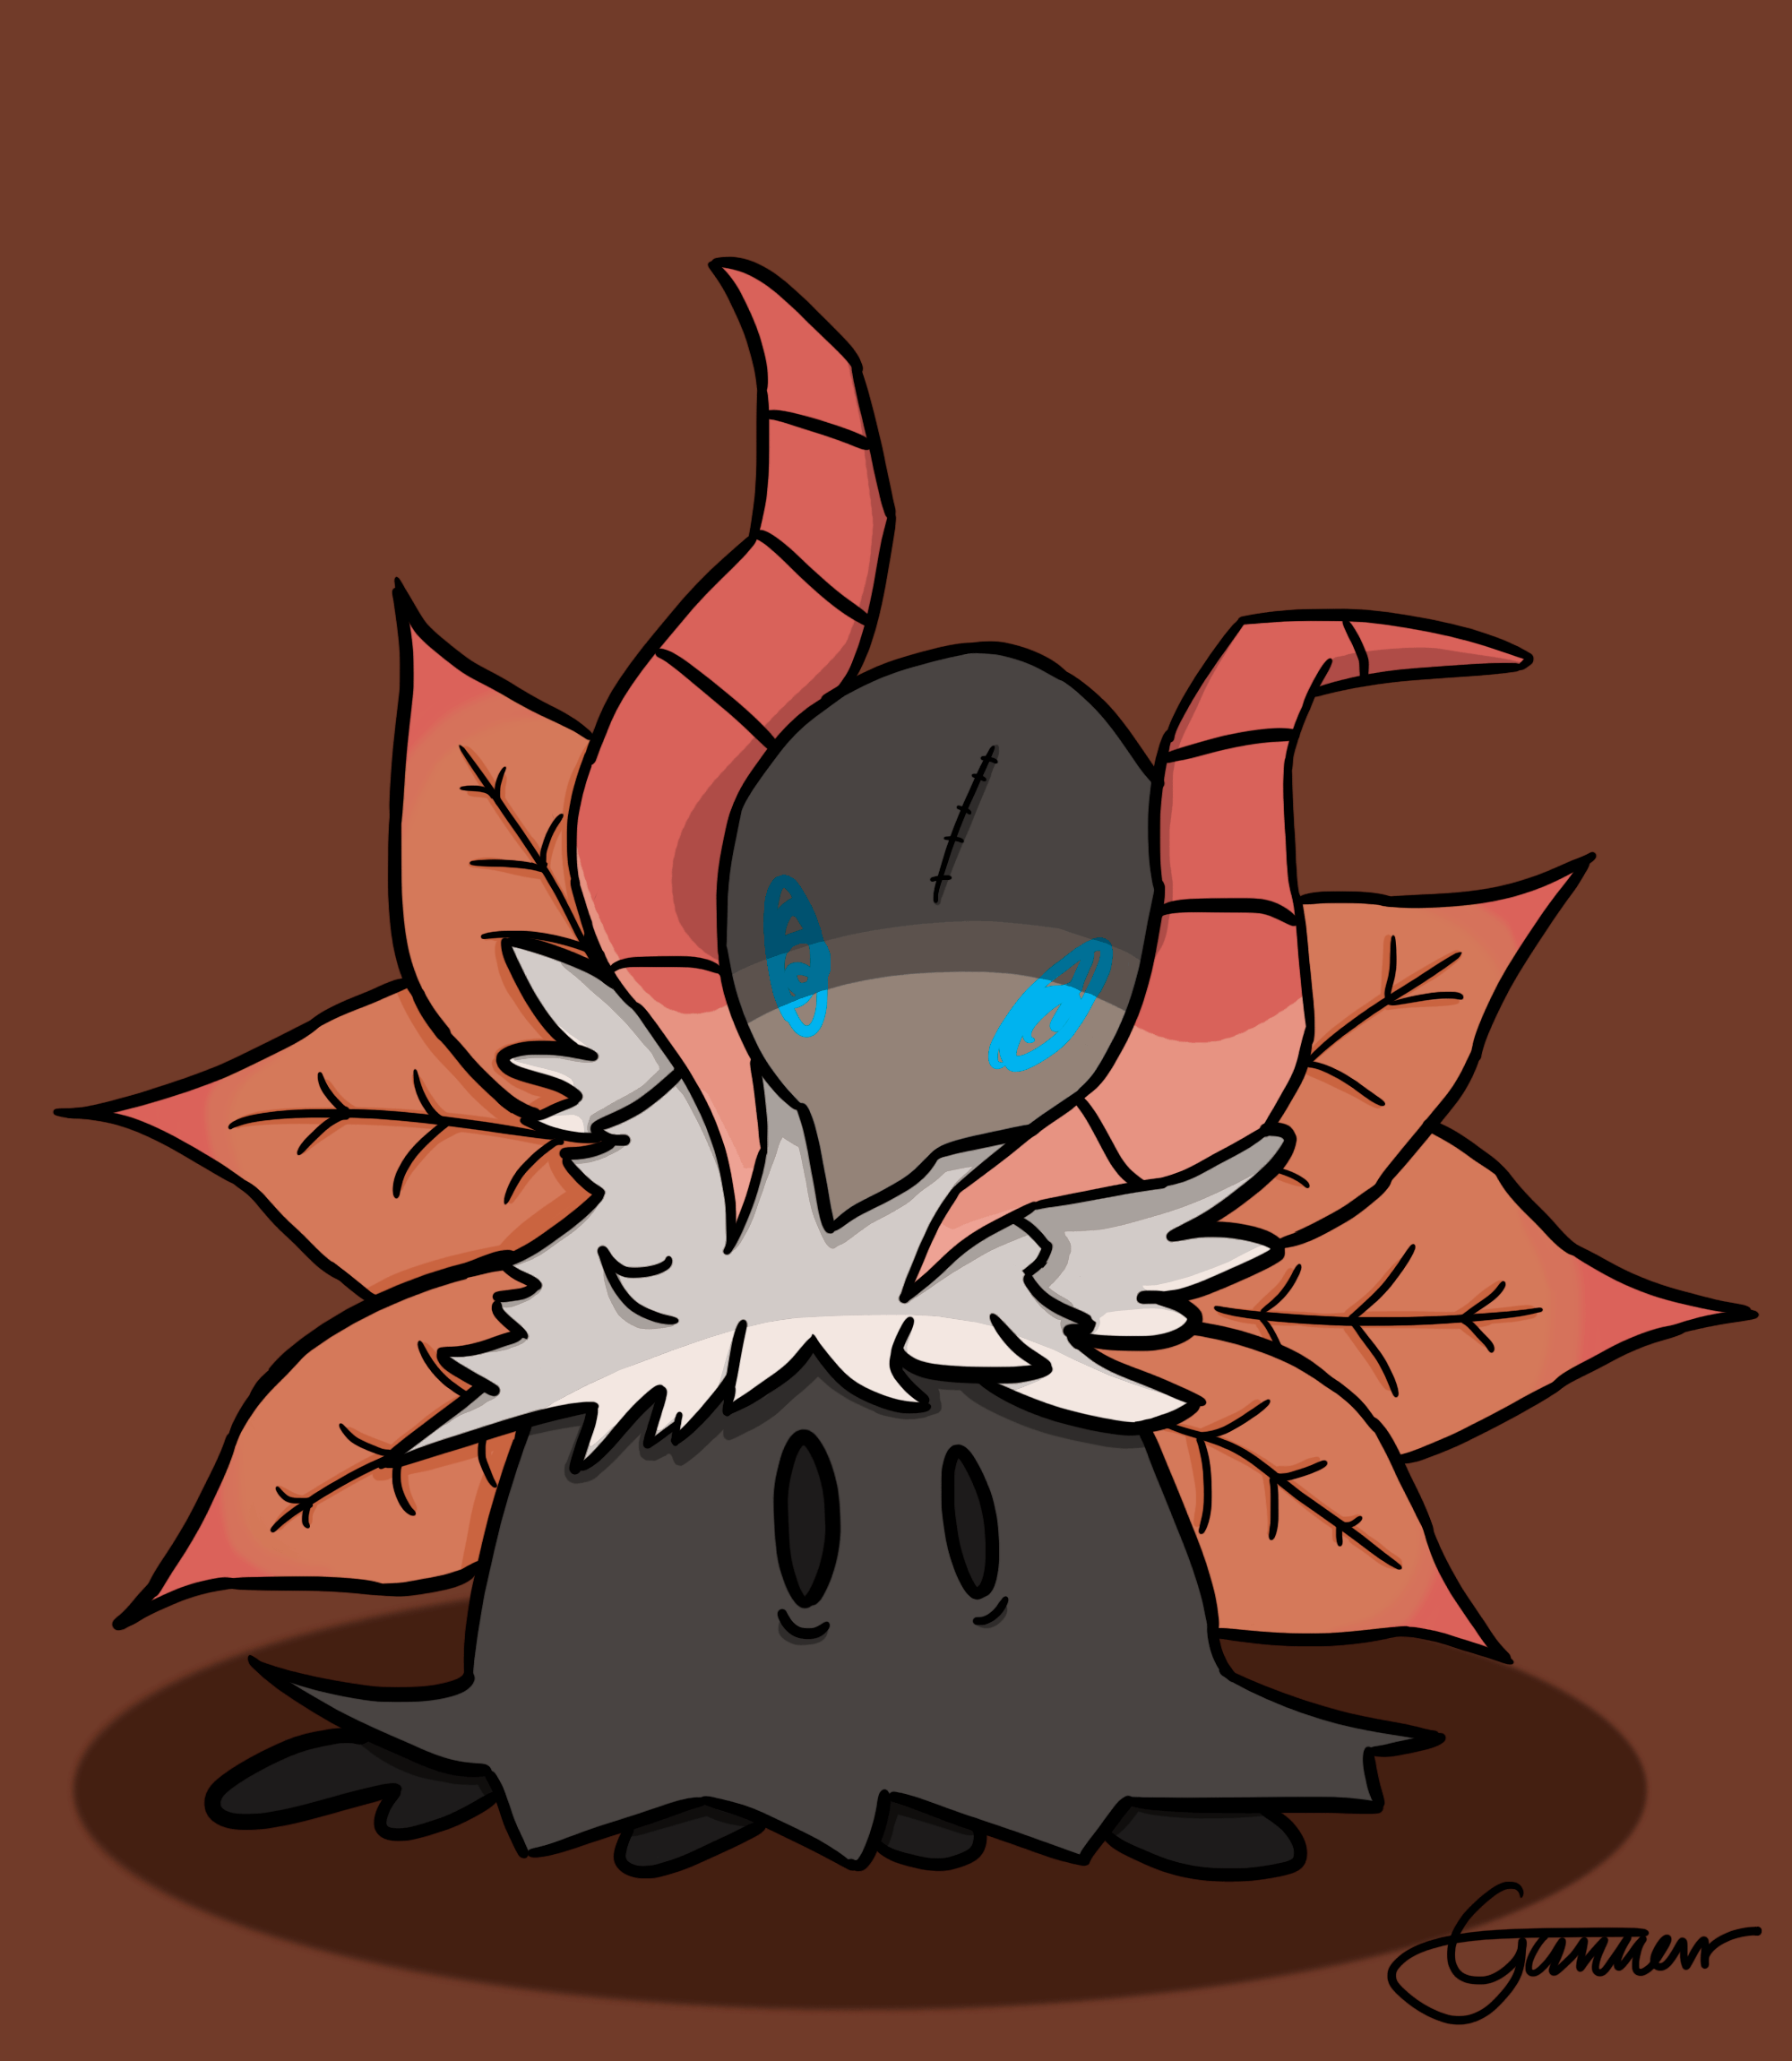 Made A Volcarona Mimikyu For My Brother. Thought You Guys Would